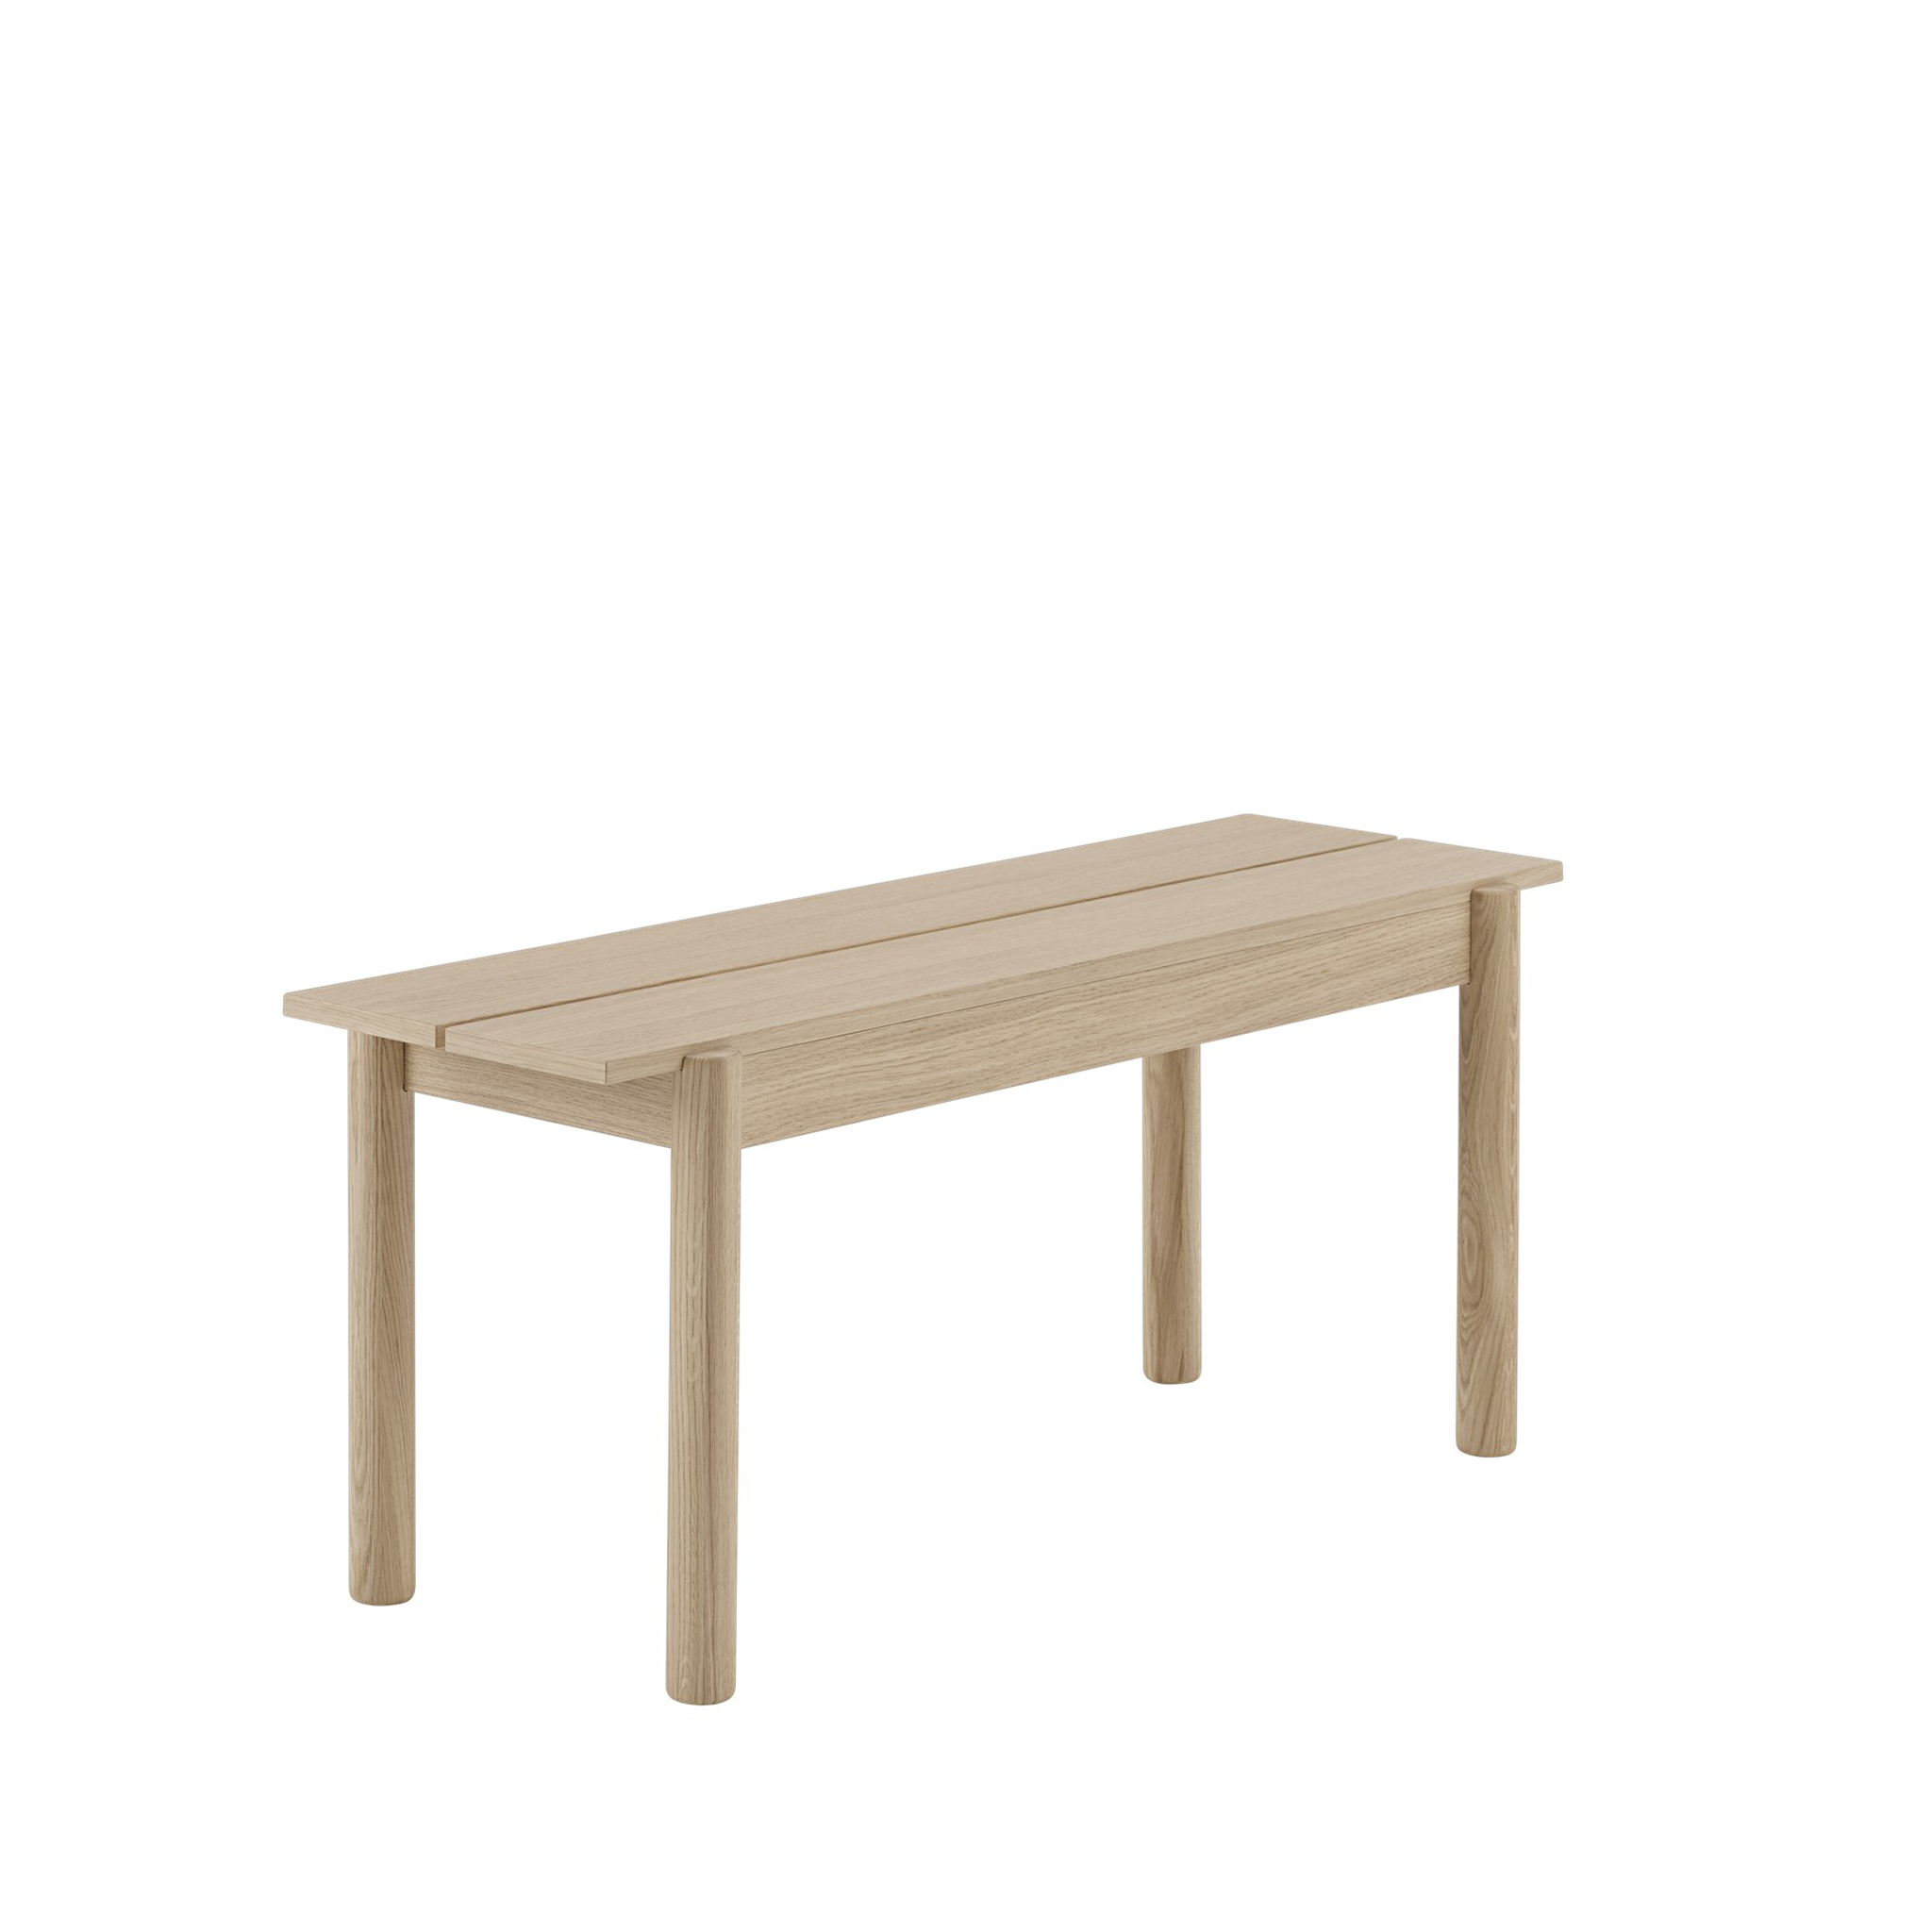 Linear Wood Bench by Muuto